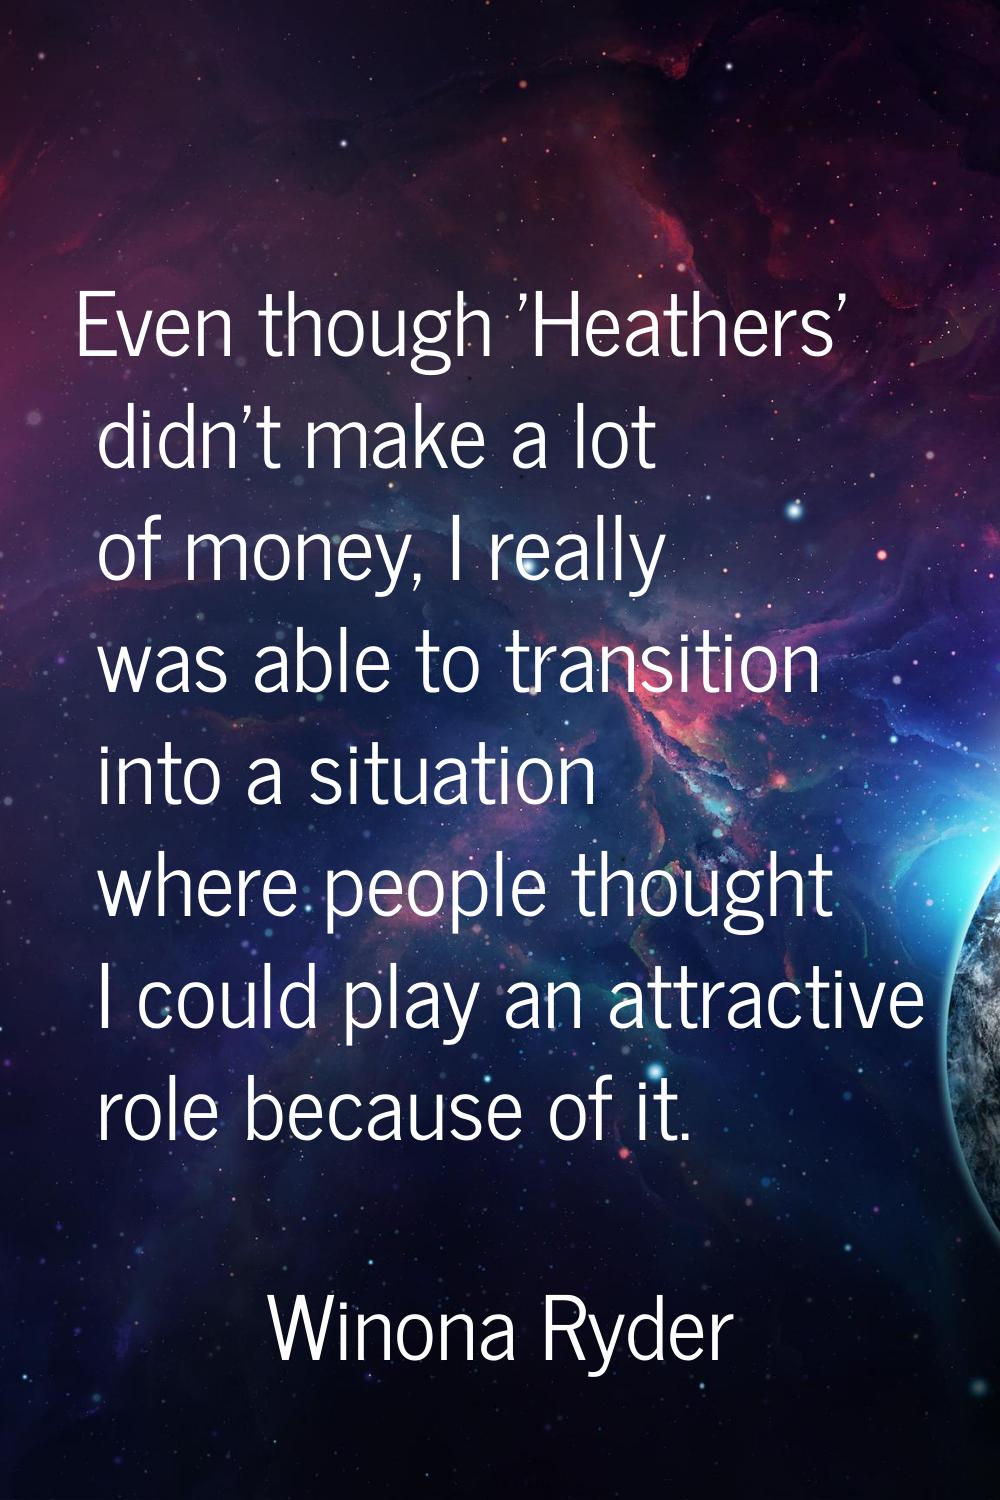 Even though 'Heathers' didn't make a lot of money, I really was able to transition into a situation